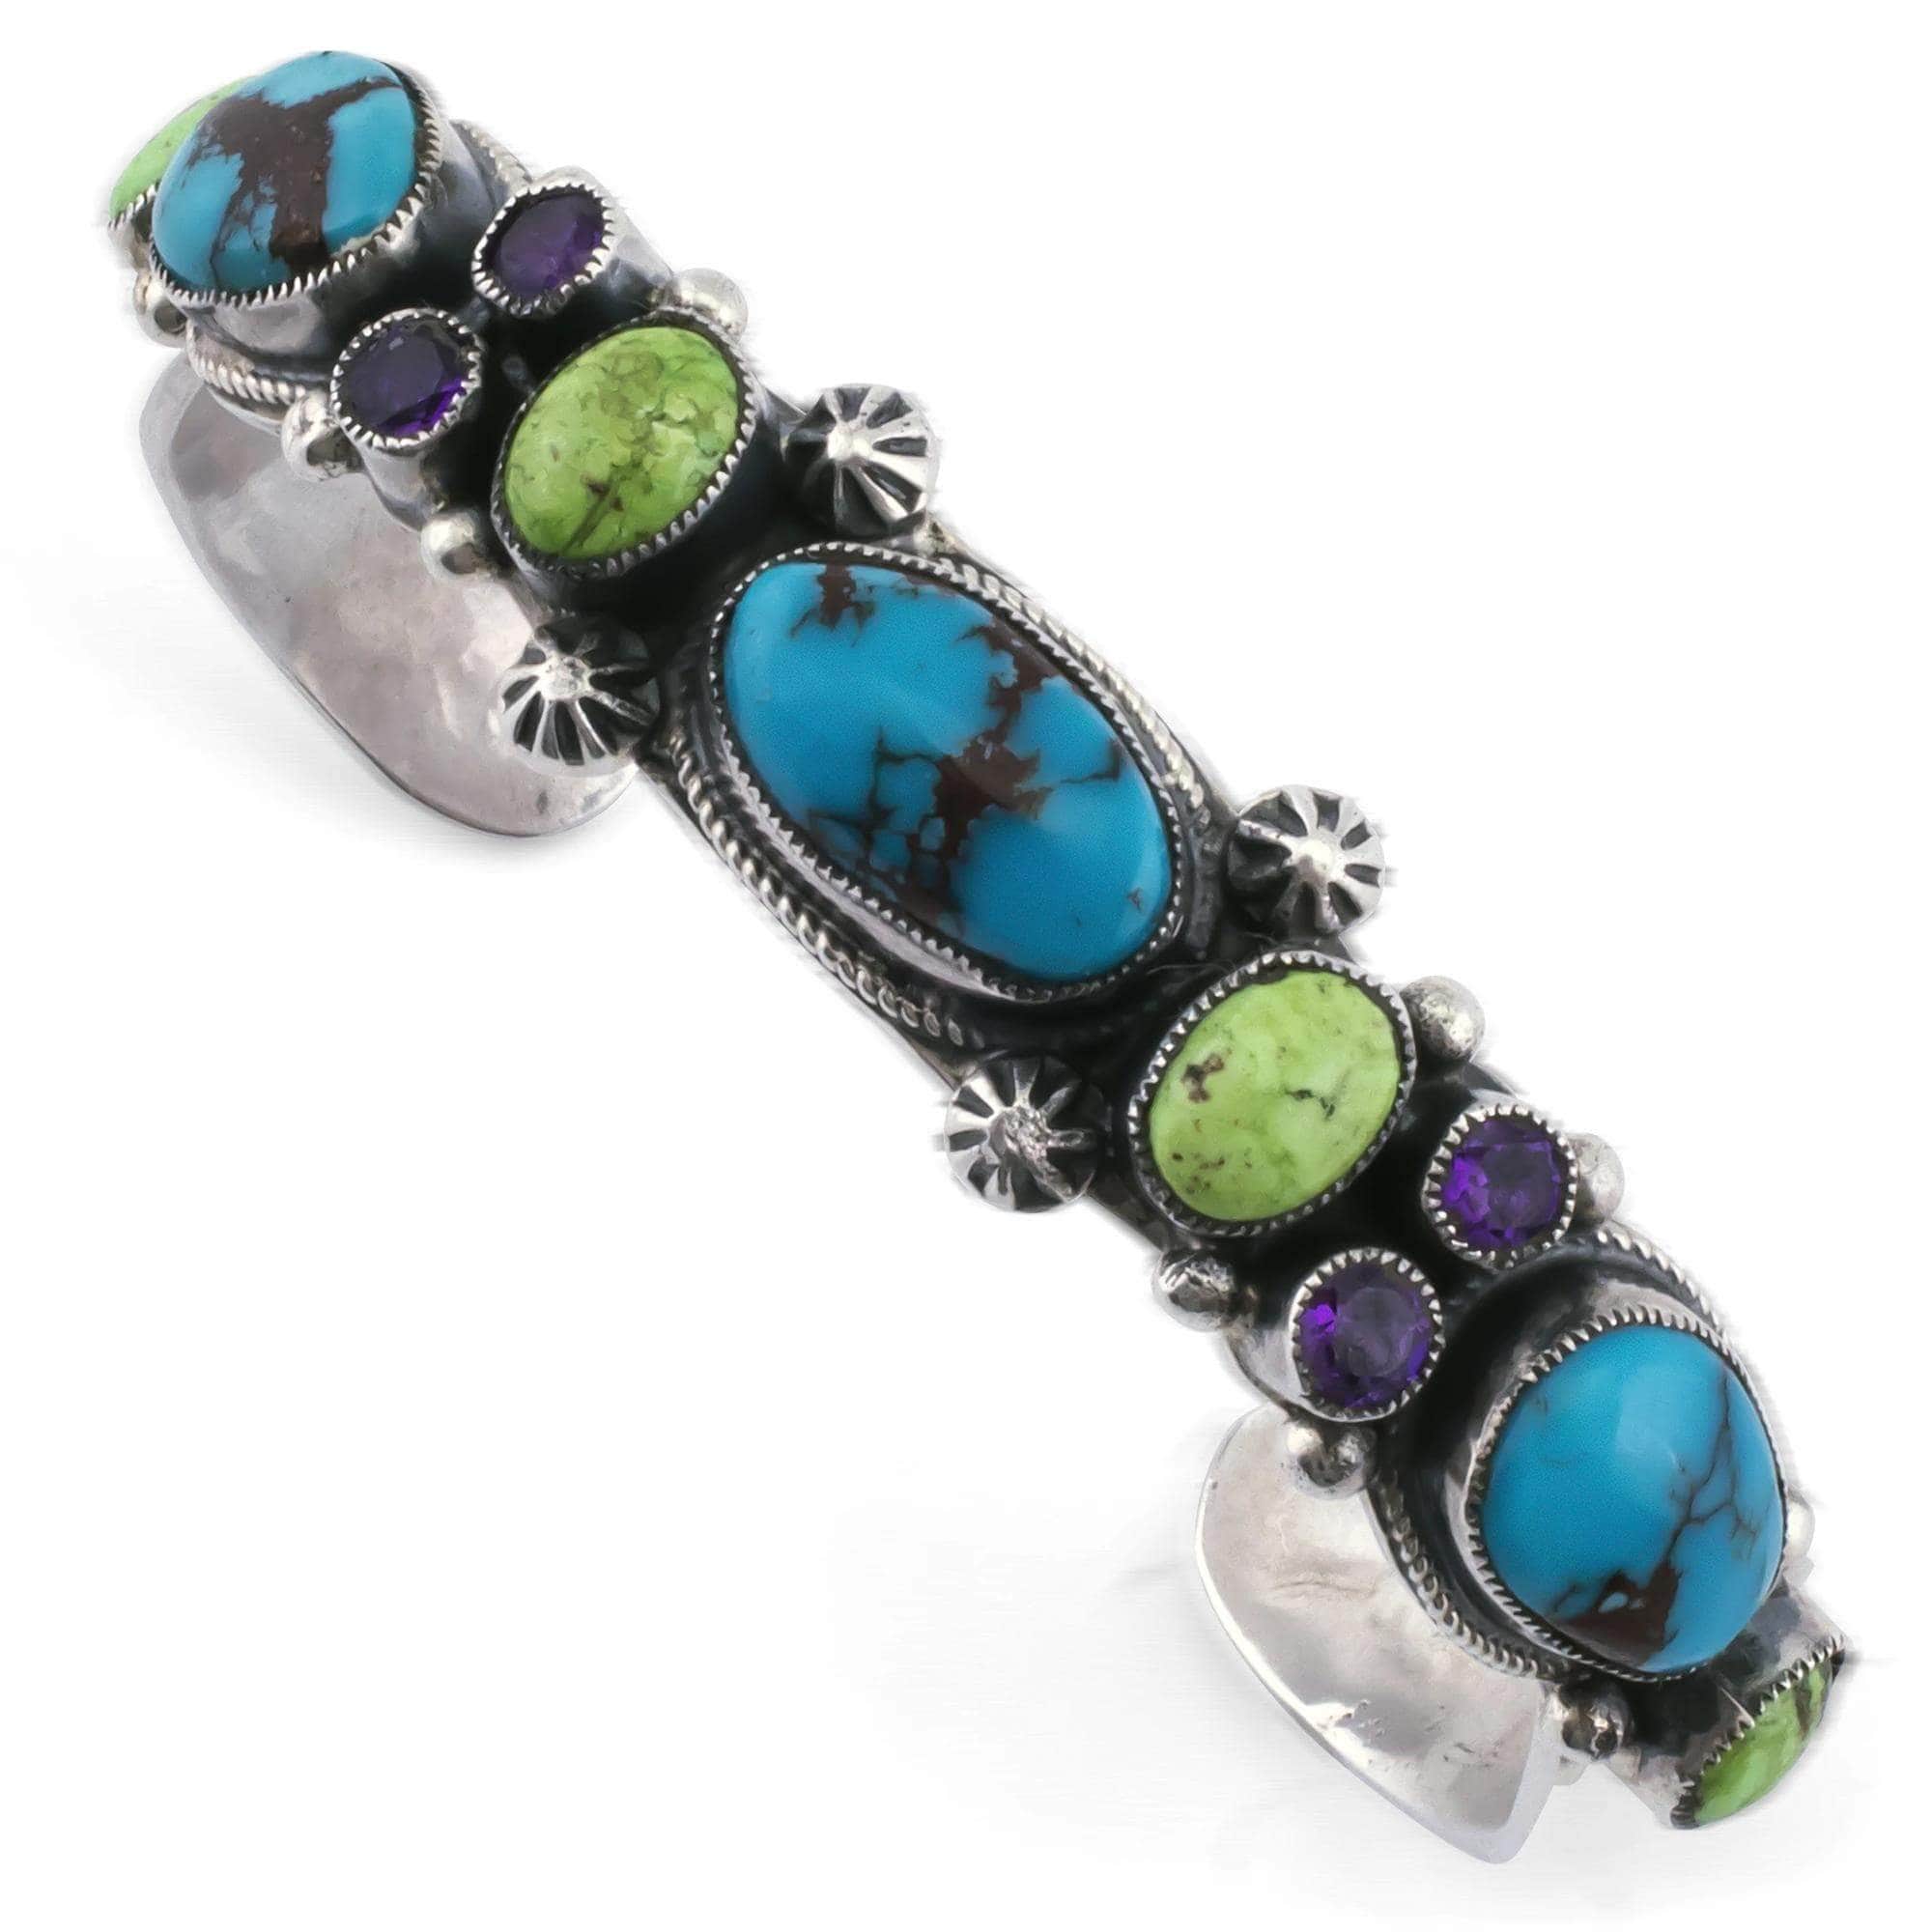 Kalifano Native American Jewelry Leo Feeney Egyptian Turquoise, Gaspite, and Amethyst USA Native American Made 925 Sterling Silver Cuff NAB1900.001